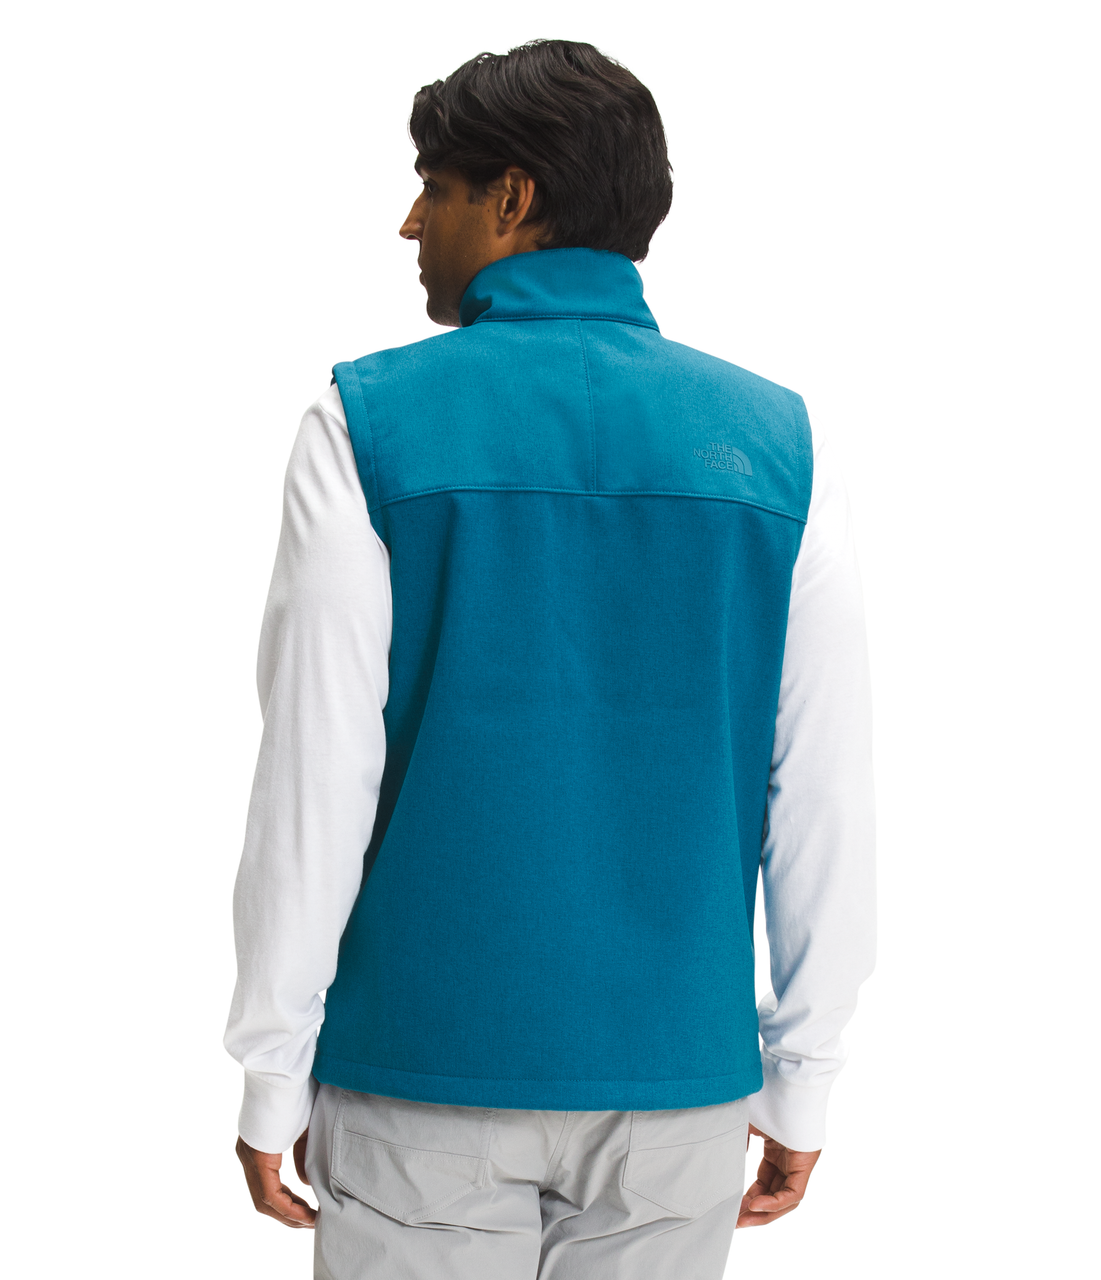 THE NORTH FACE Apex Canyonwall Vest